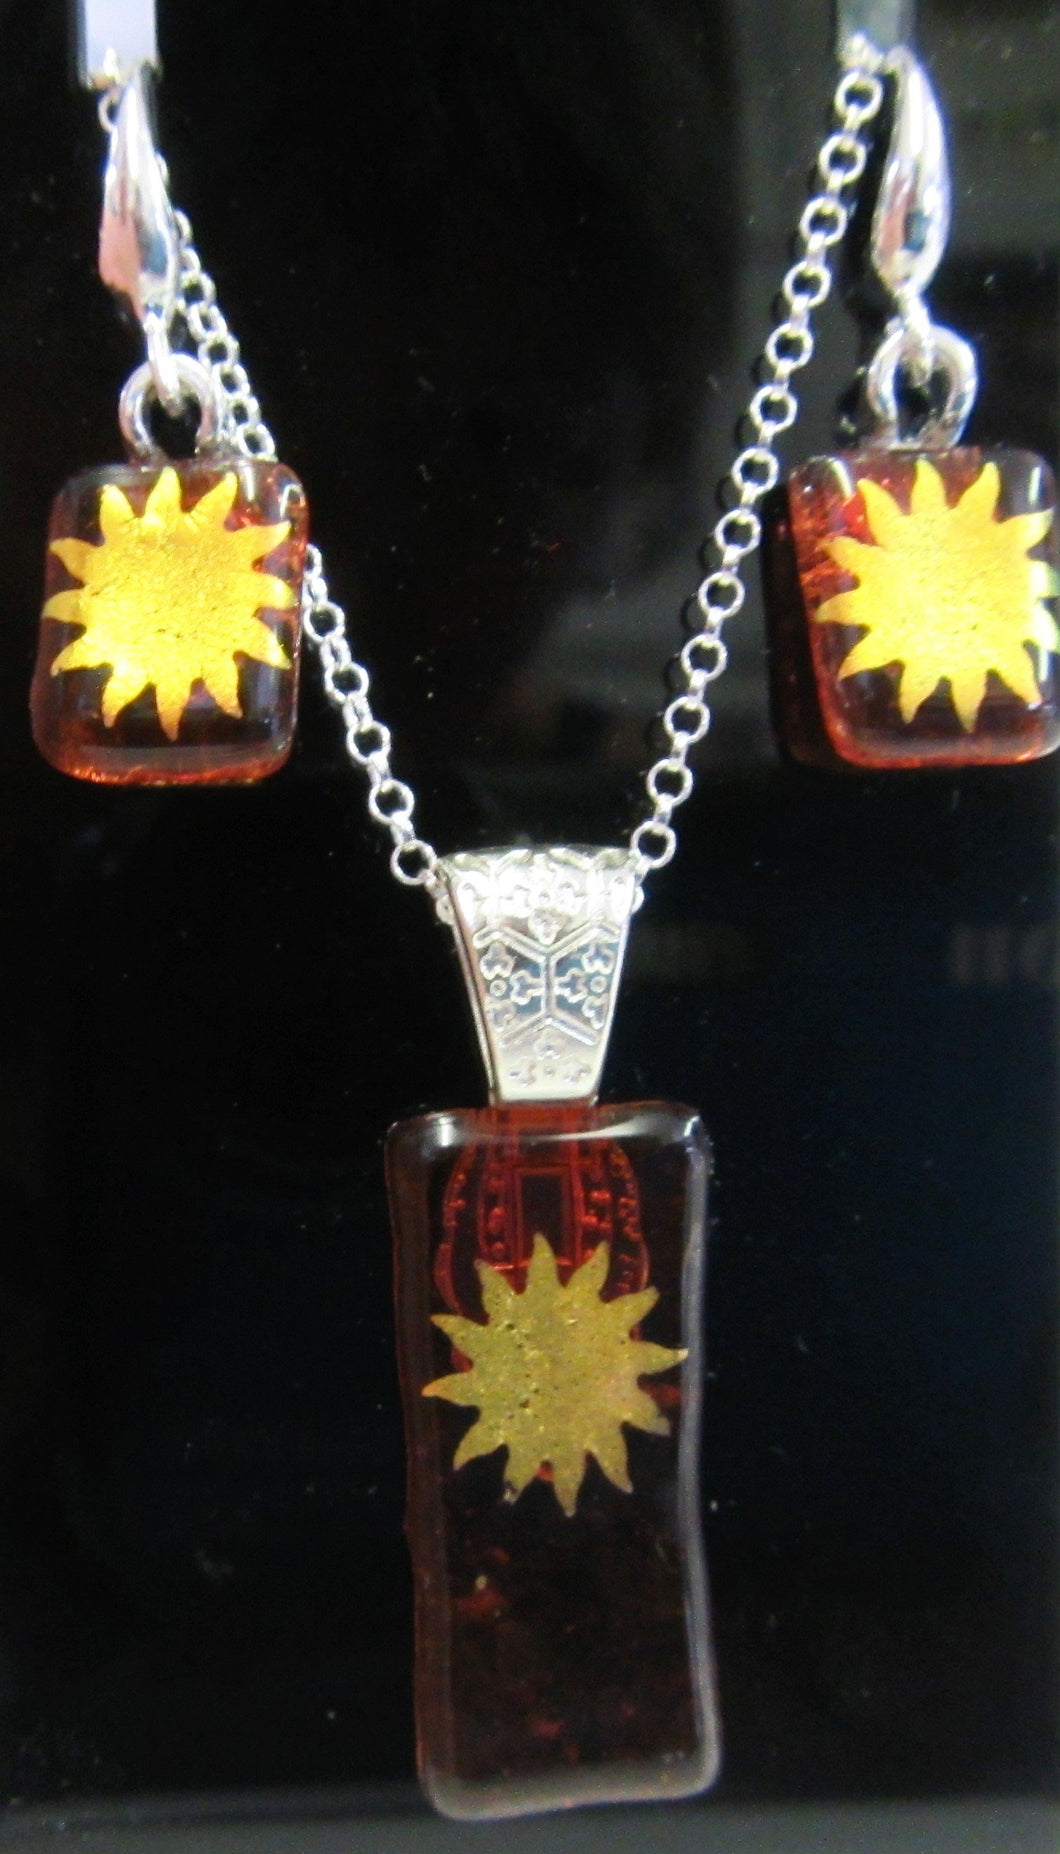 Handcrafted bronze glass with gold sun pattern necklace and earring set